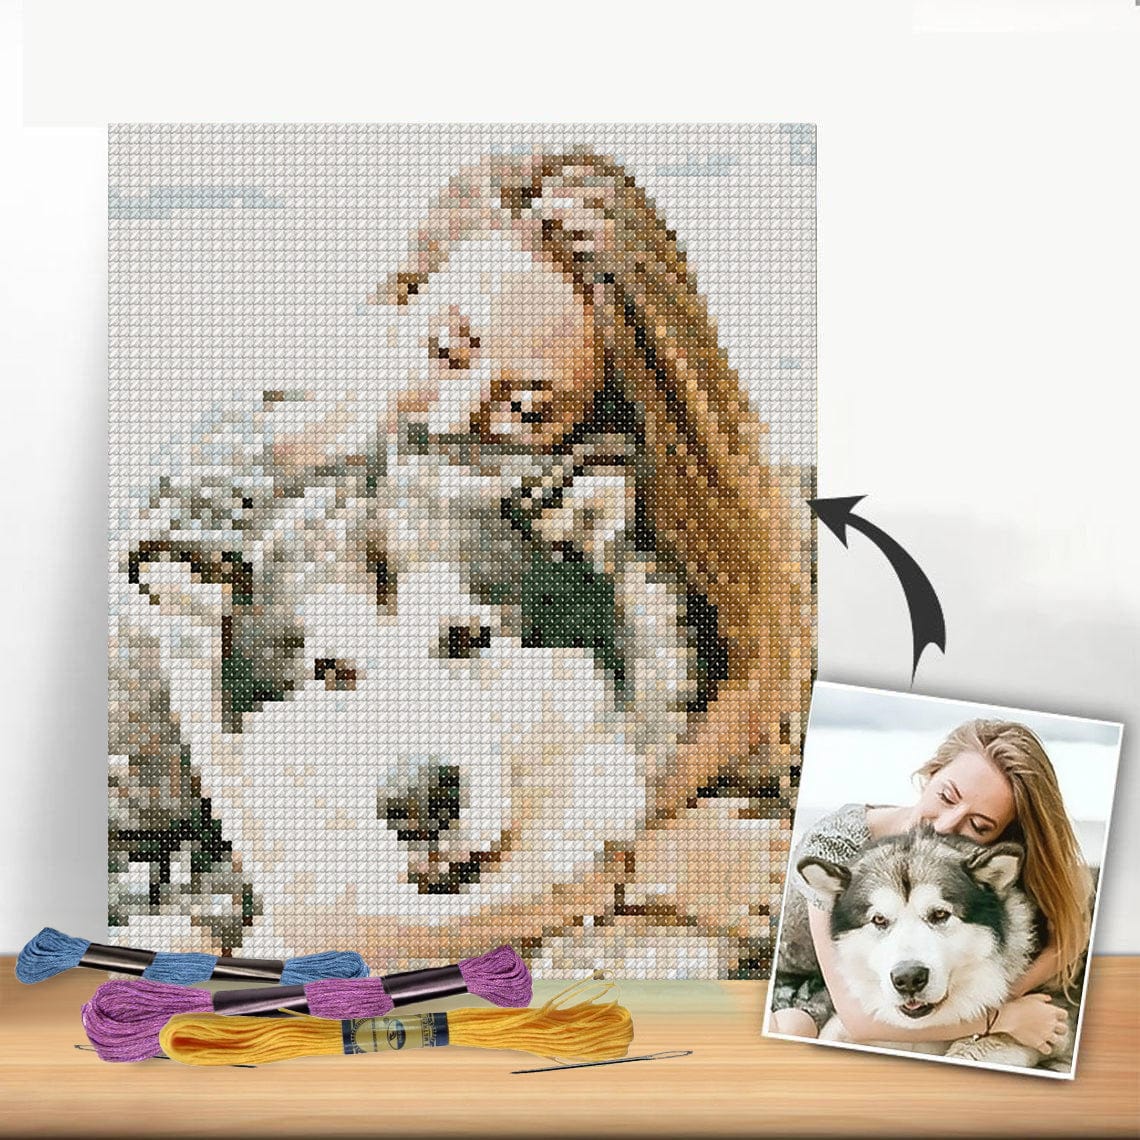 Cross Stitch | Dog - White And Brown Long Coat Large Dog - Cross Stitched